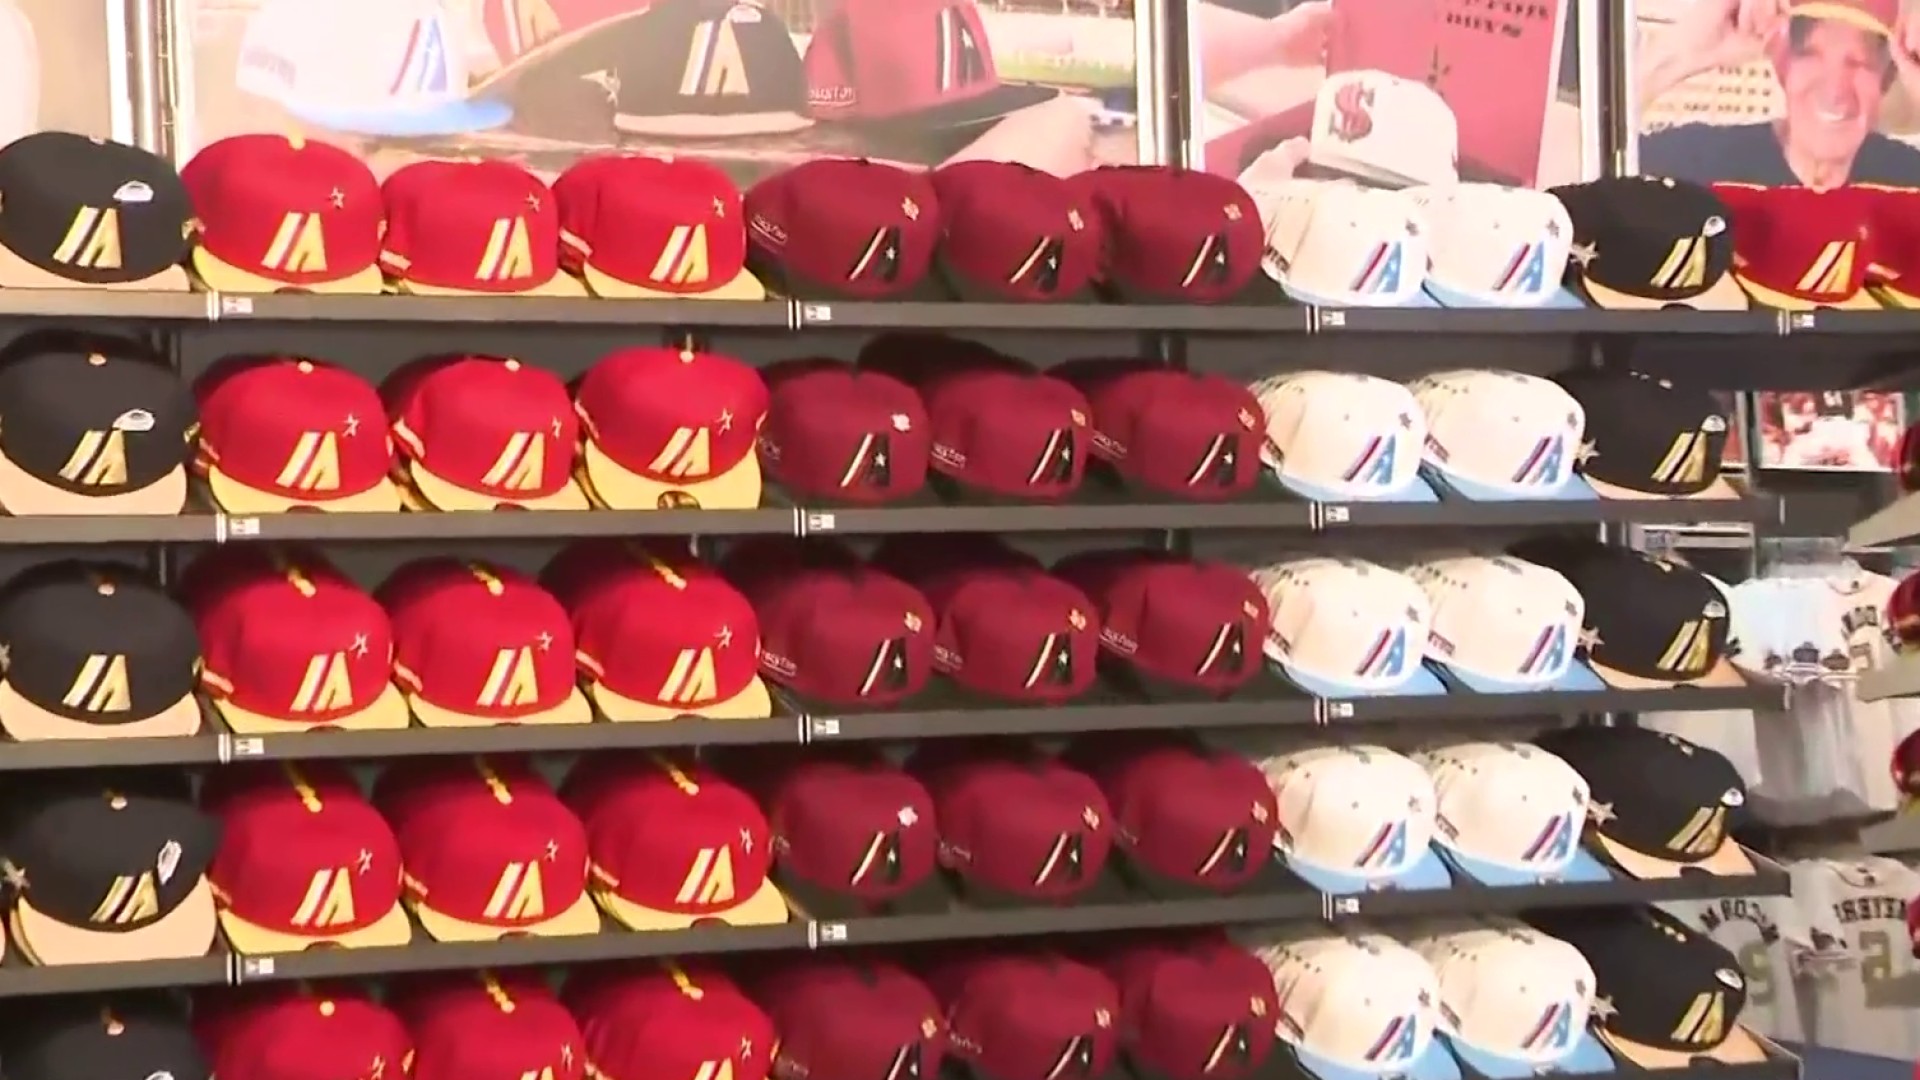 Astros Team Store, 713 Day